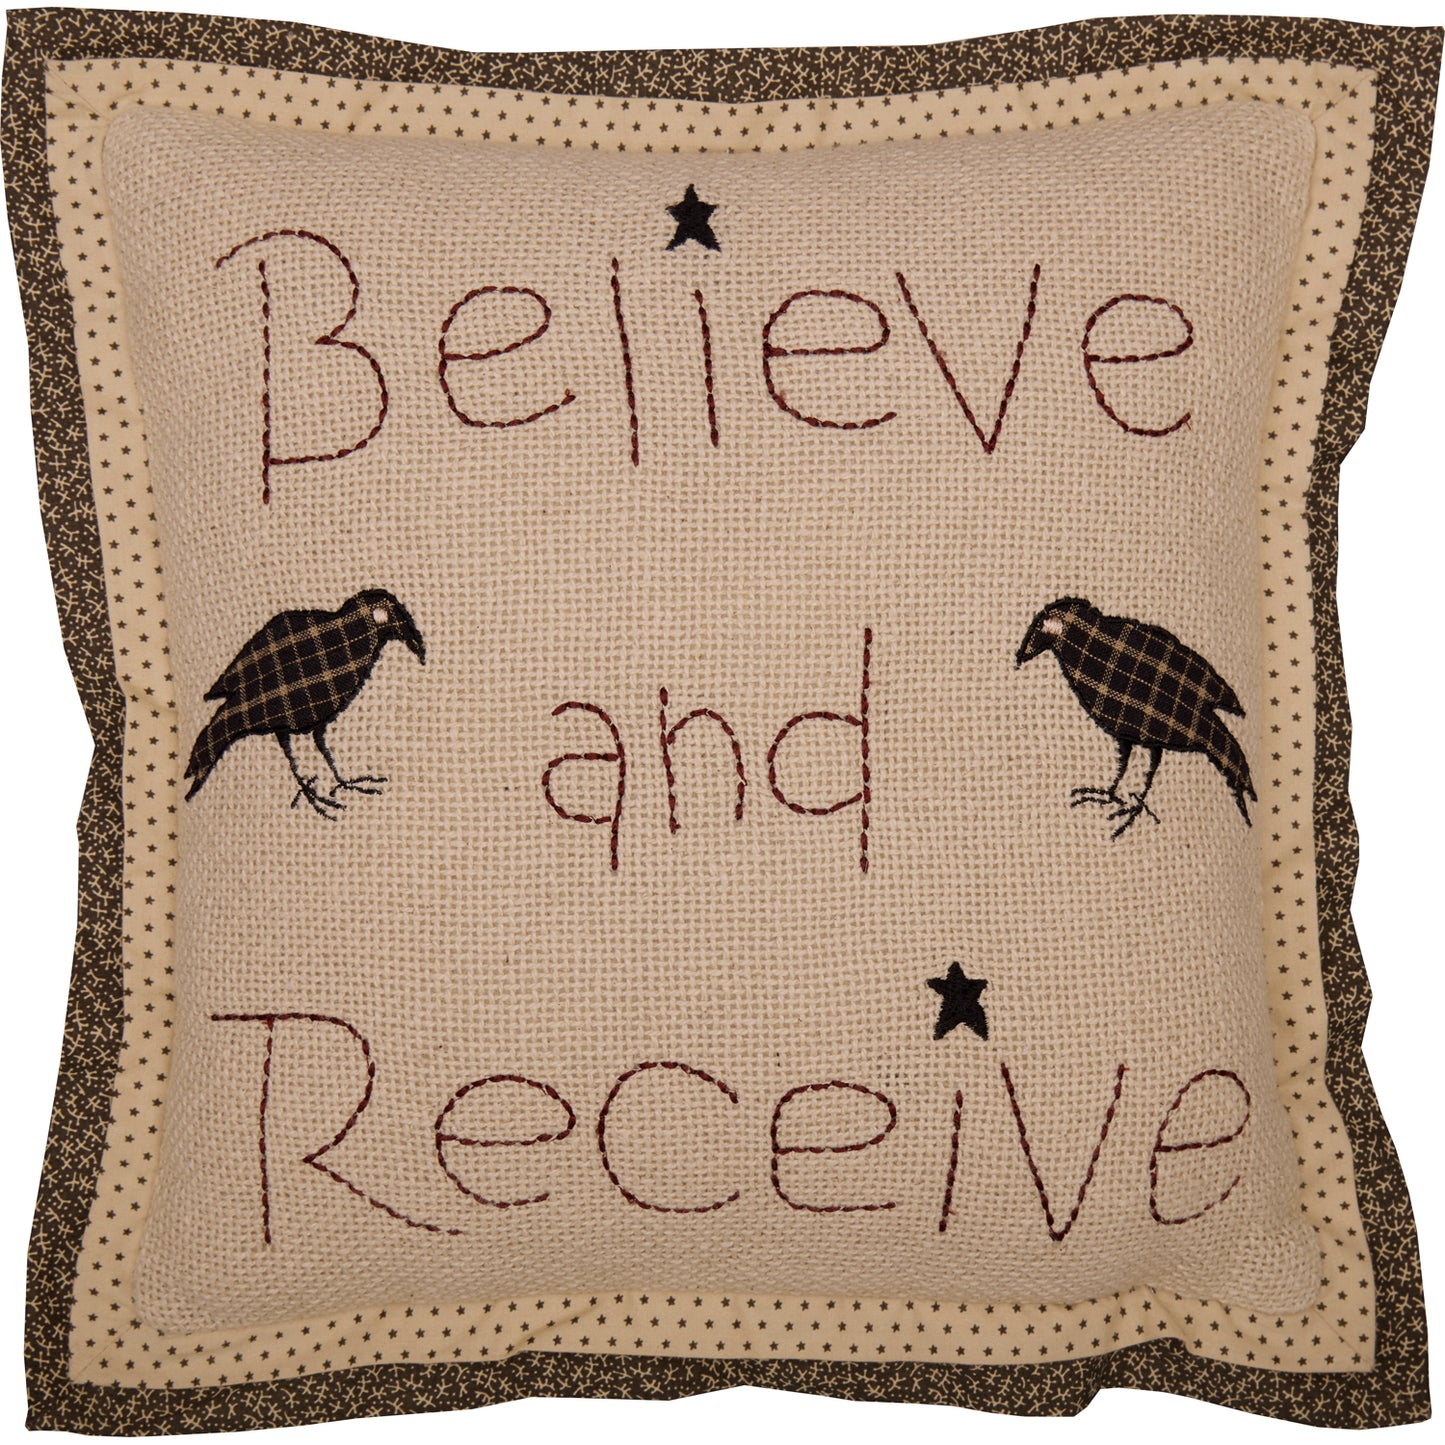 54618-Kettle-Grove-Believe-and-Receive-Pillow-12x12-image-4